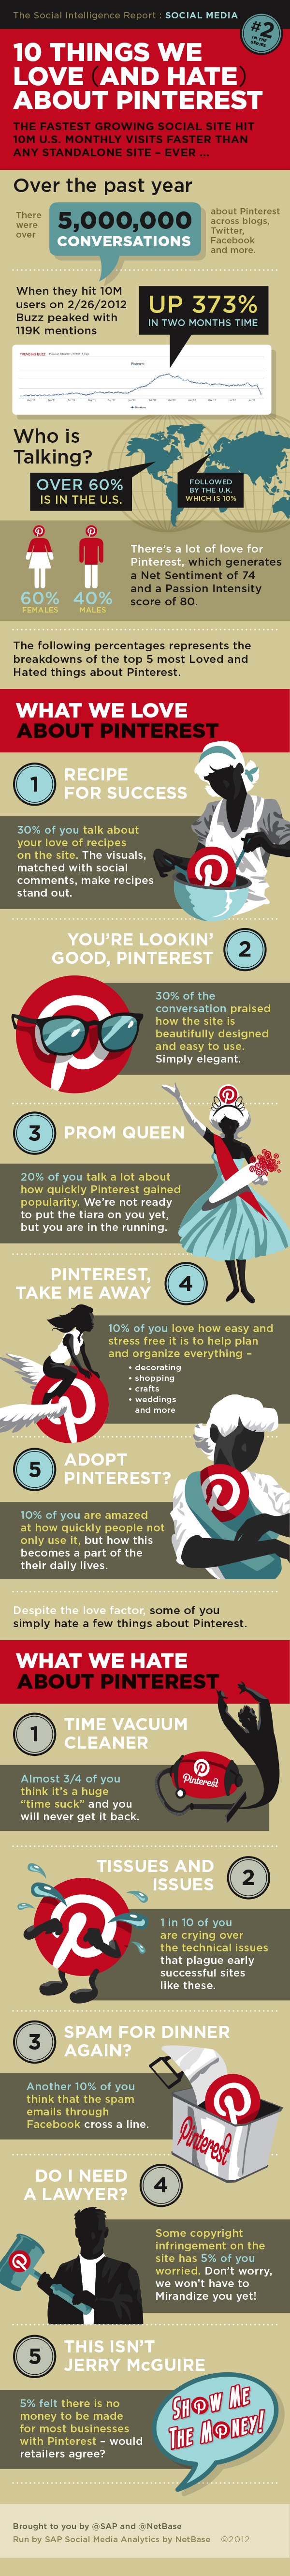 10 Awesome Statistics About Pinterest